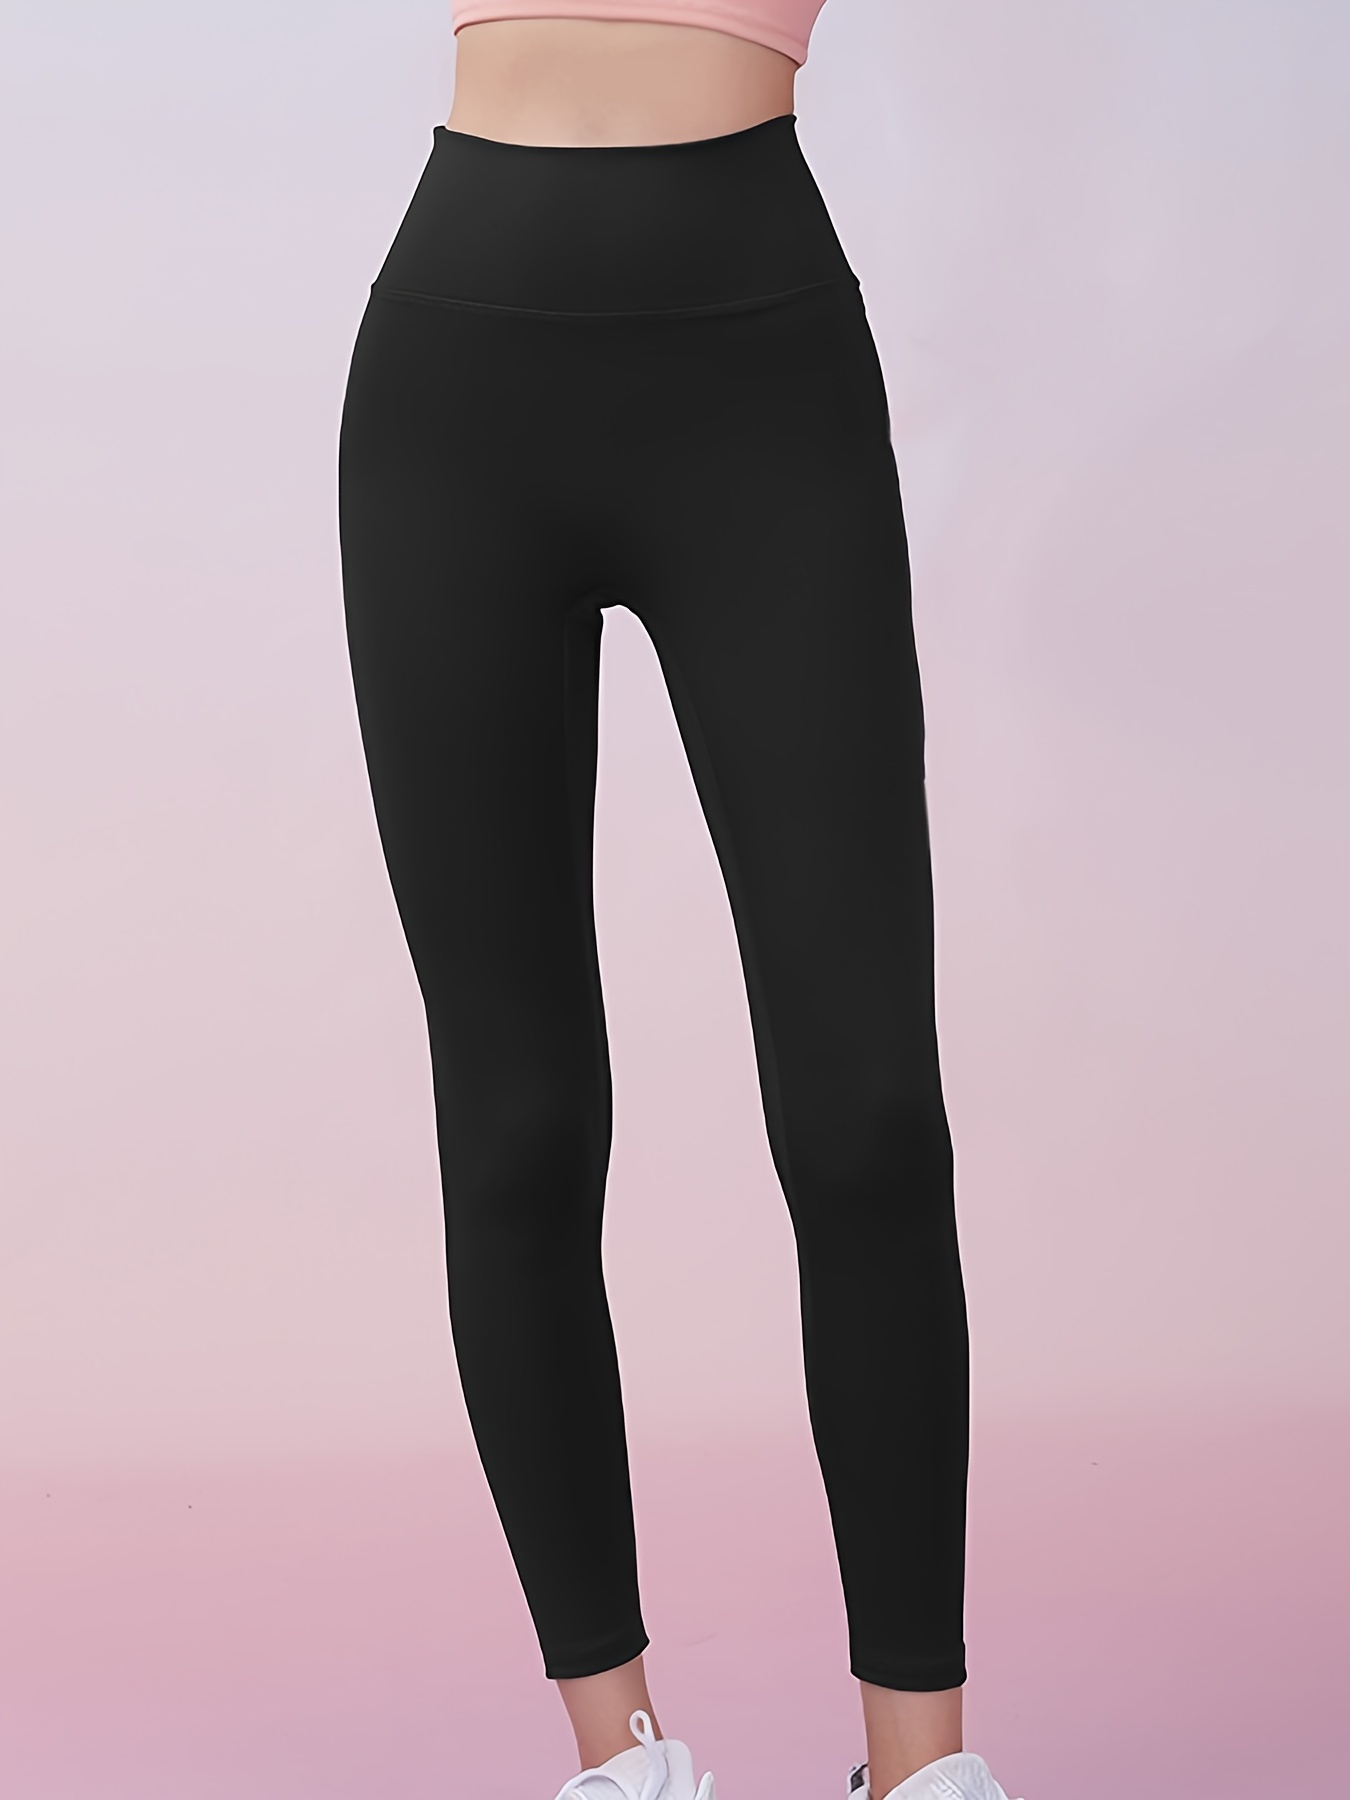 Black Jacket High Waisted Seamless Leggings Best Yoga Clothes for Women -  China Sustainable Workout Clothes and Yoga Set price